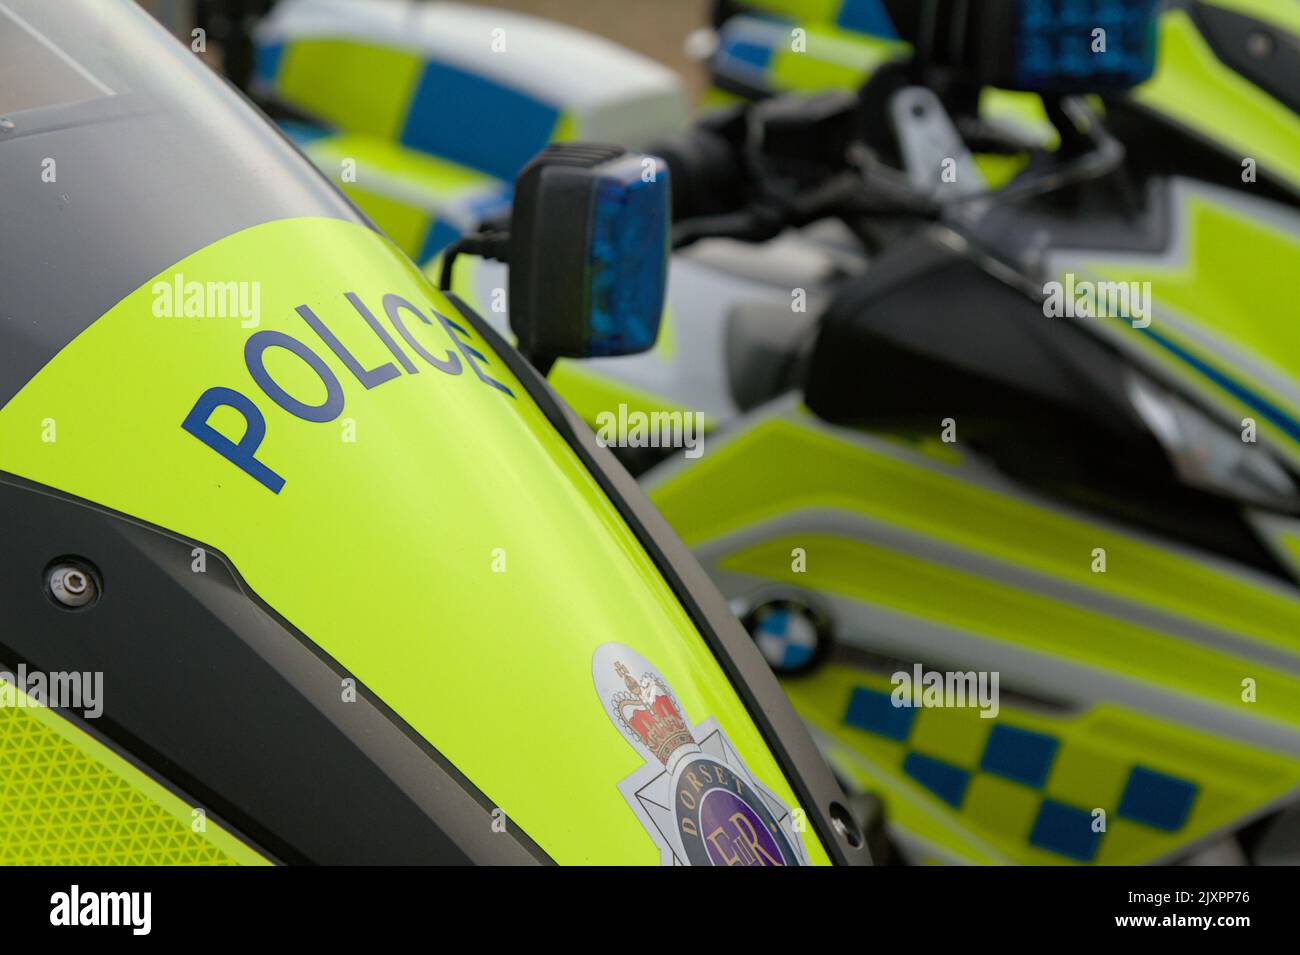 ROW of Dorset police BMW Motorbikes, Royaume-Uni Banque D'Images